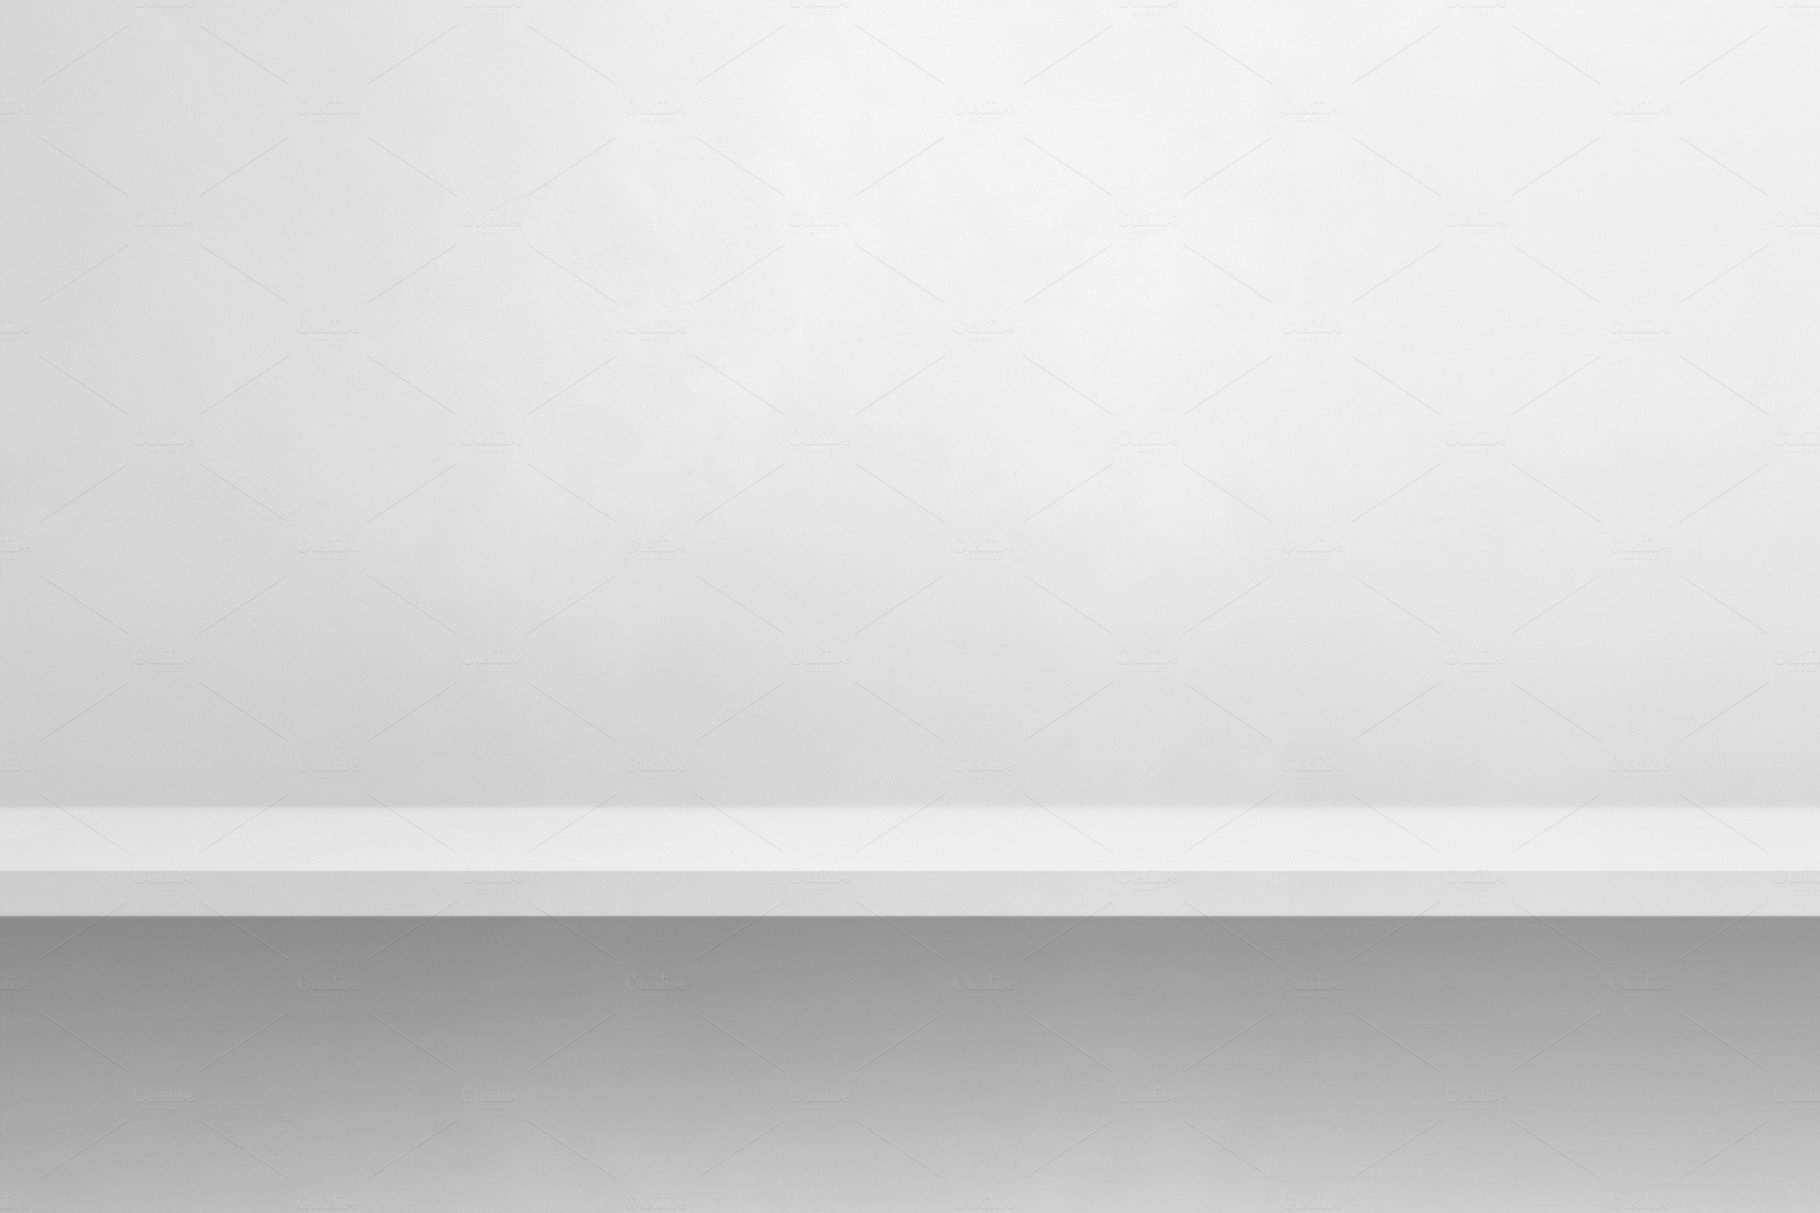 Empty shelf on a white wall. Background template. Horizontal bac cover image.